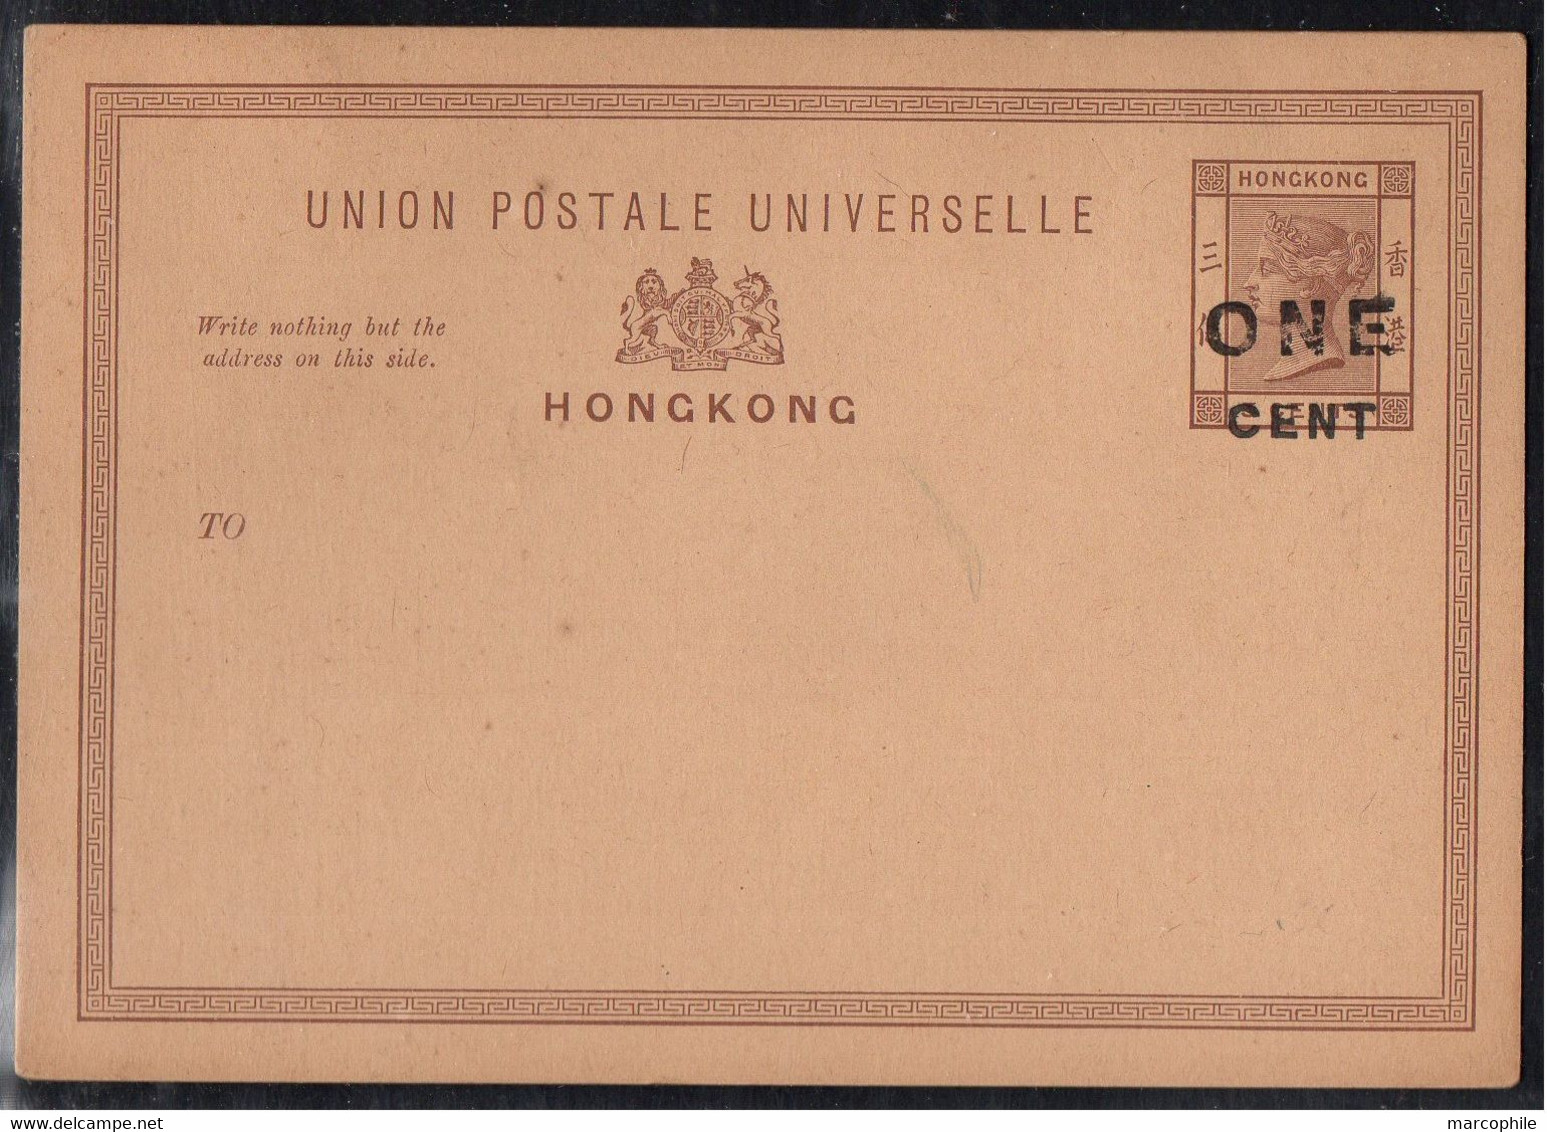 HONG KONG - QV - GB / ENTIER POSTAL SURCHARGE 1 C/3 C - STATIONERY CARD (ref LE3548) - Postal Stationery